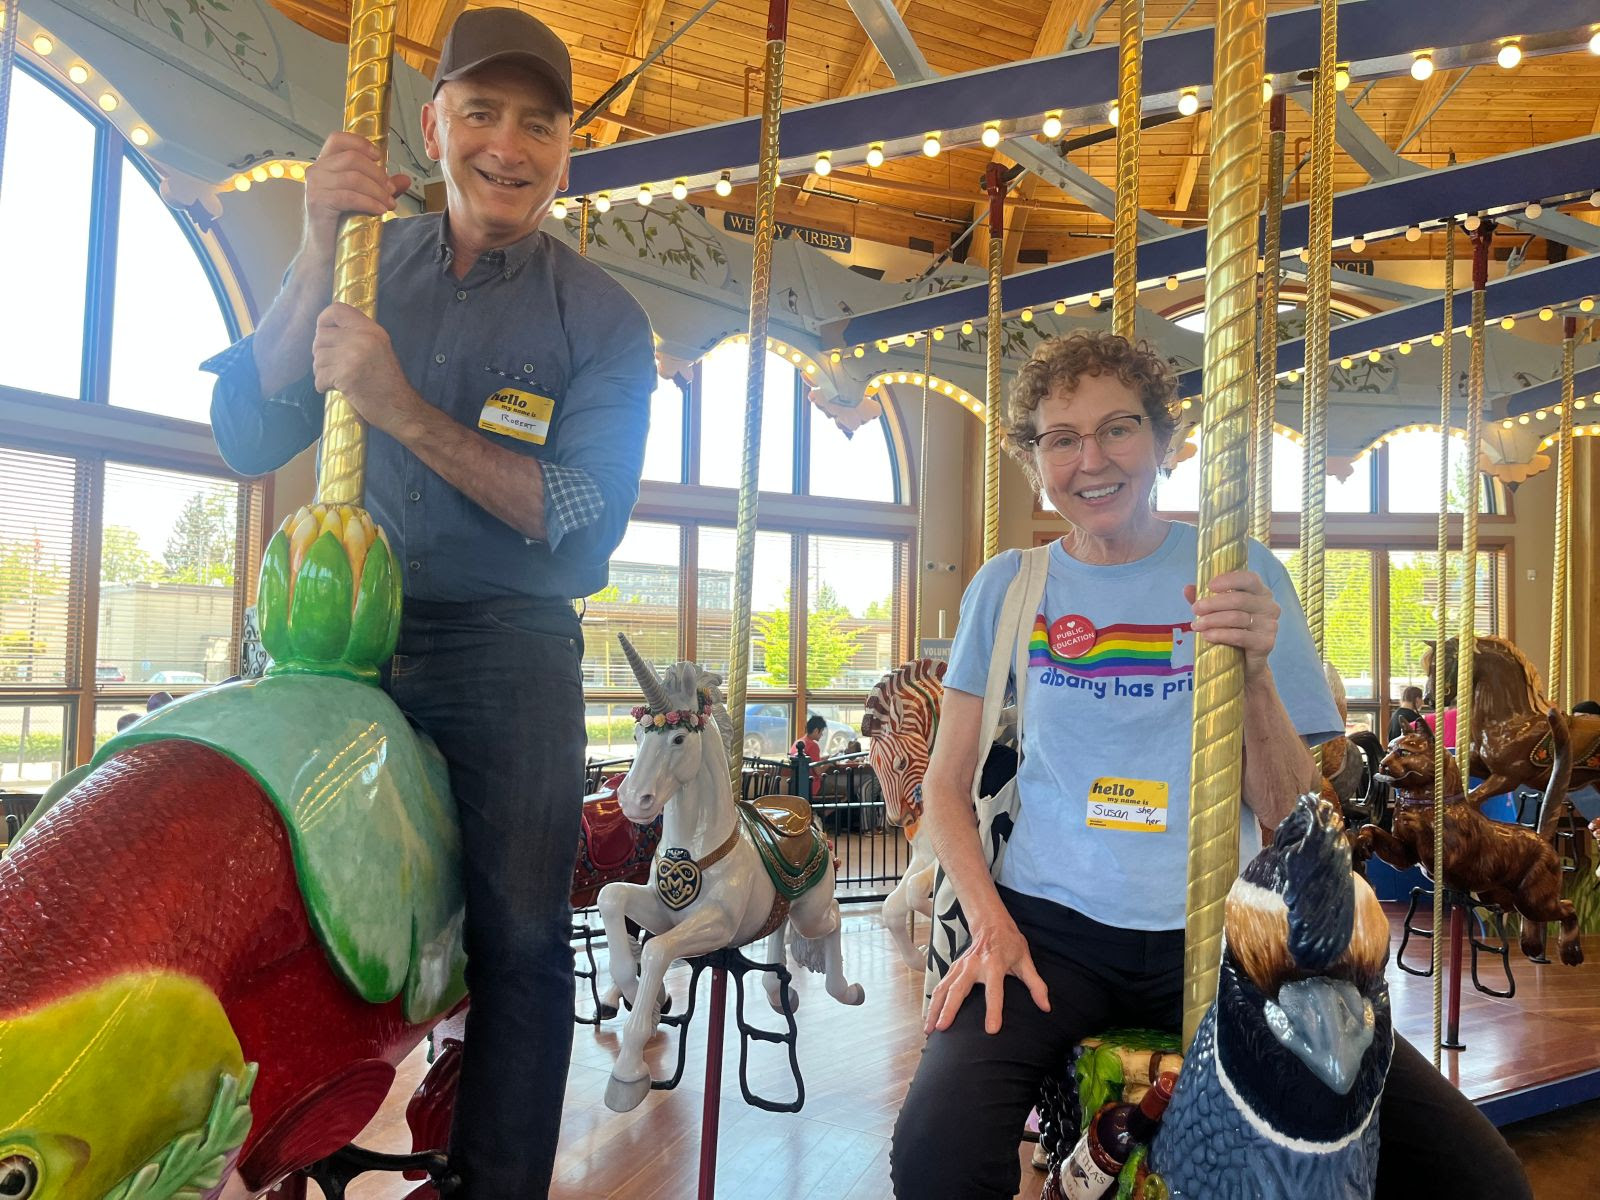 Robert Bray and Susan ride the Albany carousel with bright windows behind them.